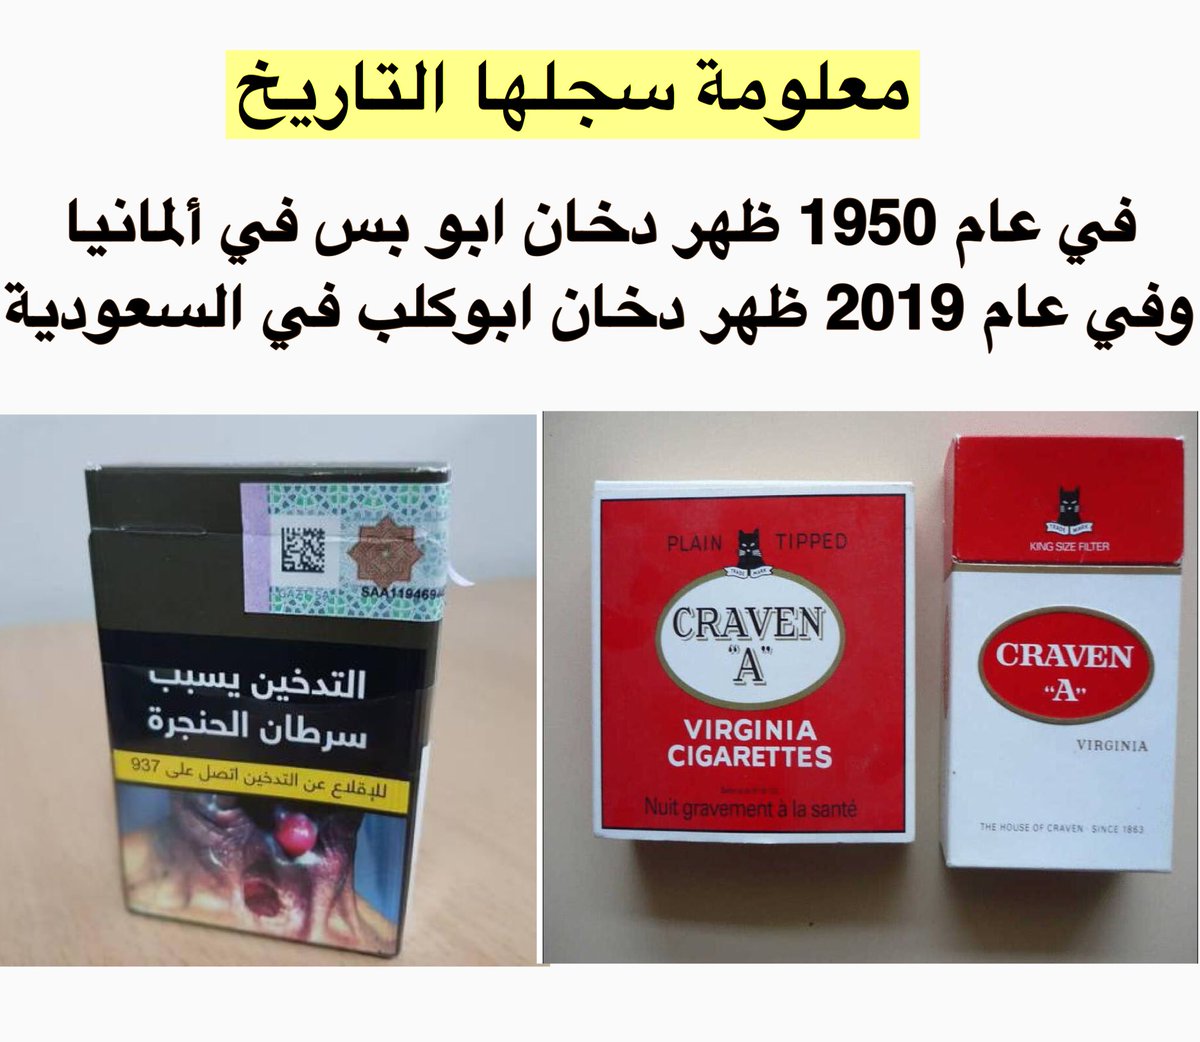 Philip Morris International On Twitter Dyk It S Not The Nicotine That Makes Cigarette Smoke So Harmful Fancy Learning A Bit More About The Role Of Nicotine In Cigarettes Click Here Https T Co Vqy9fzcgql